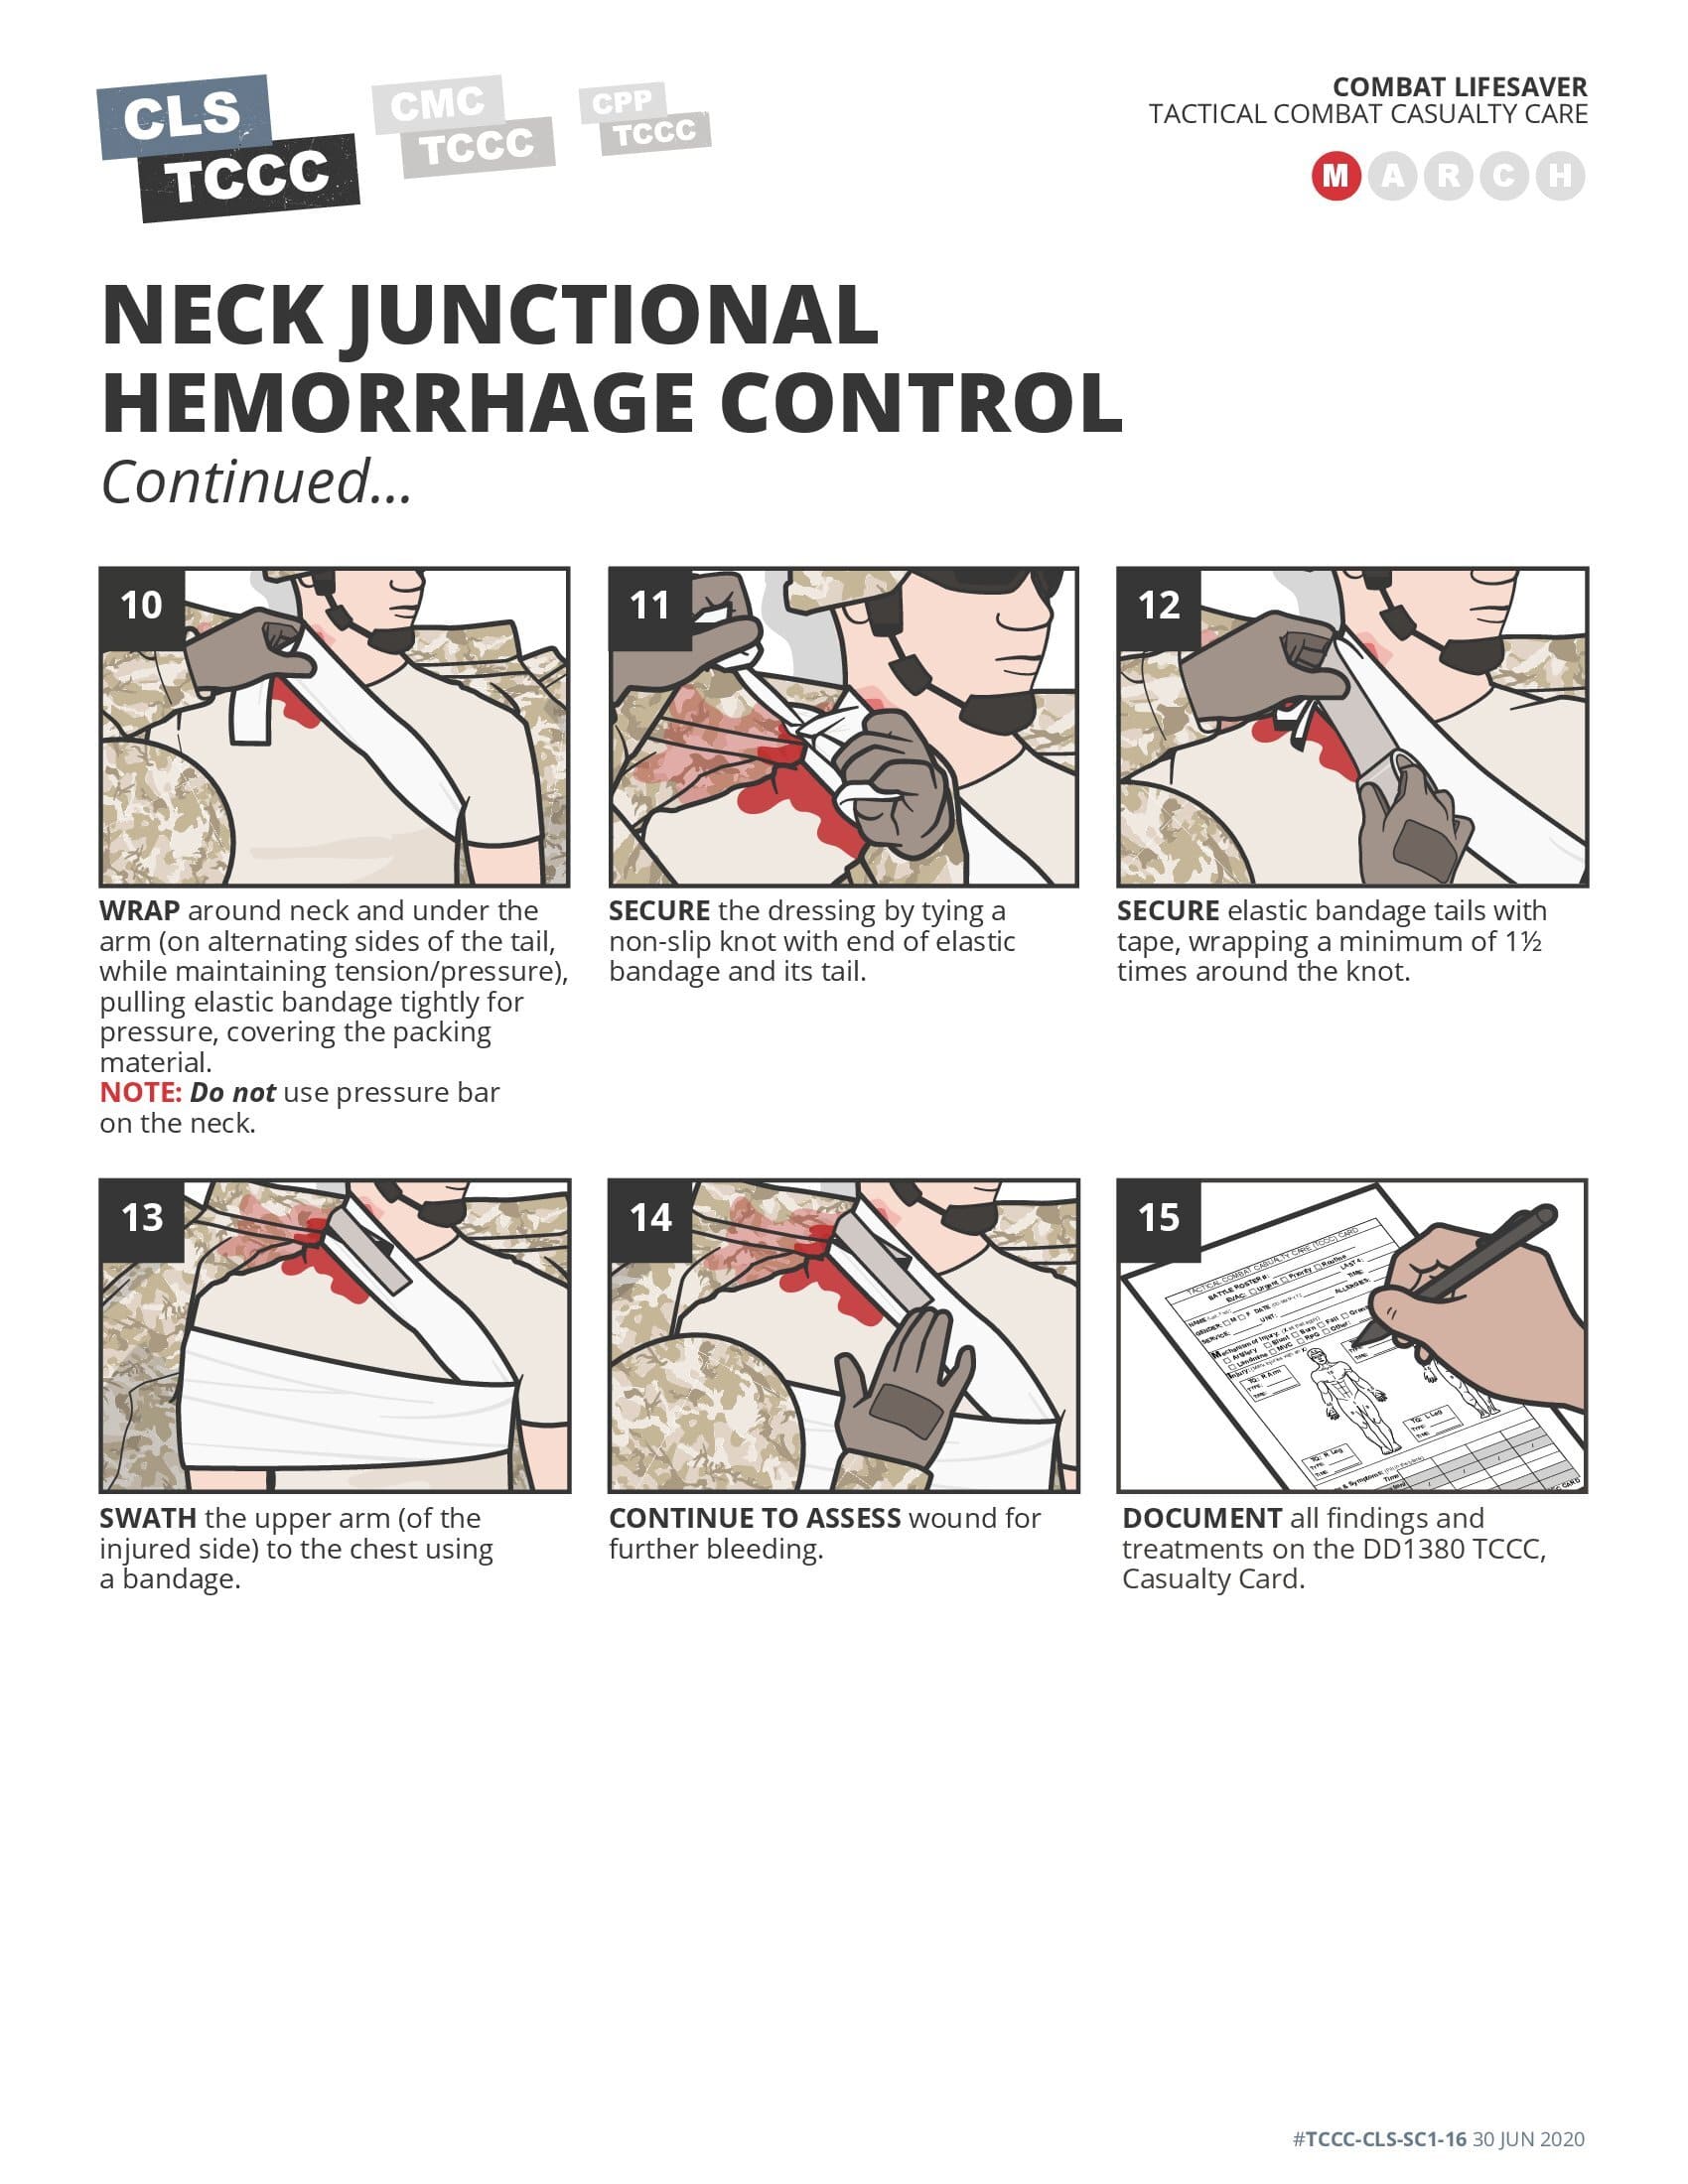 Neck Junctional Hemorrhage Control, page 2